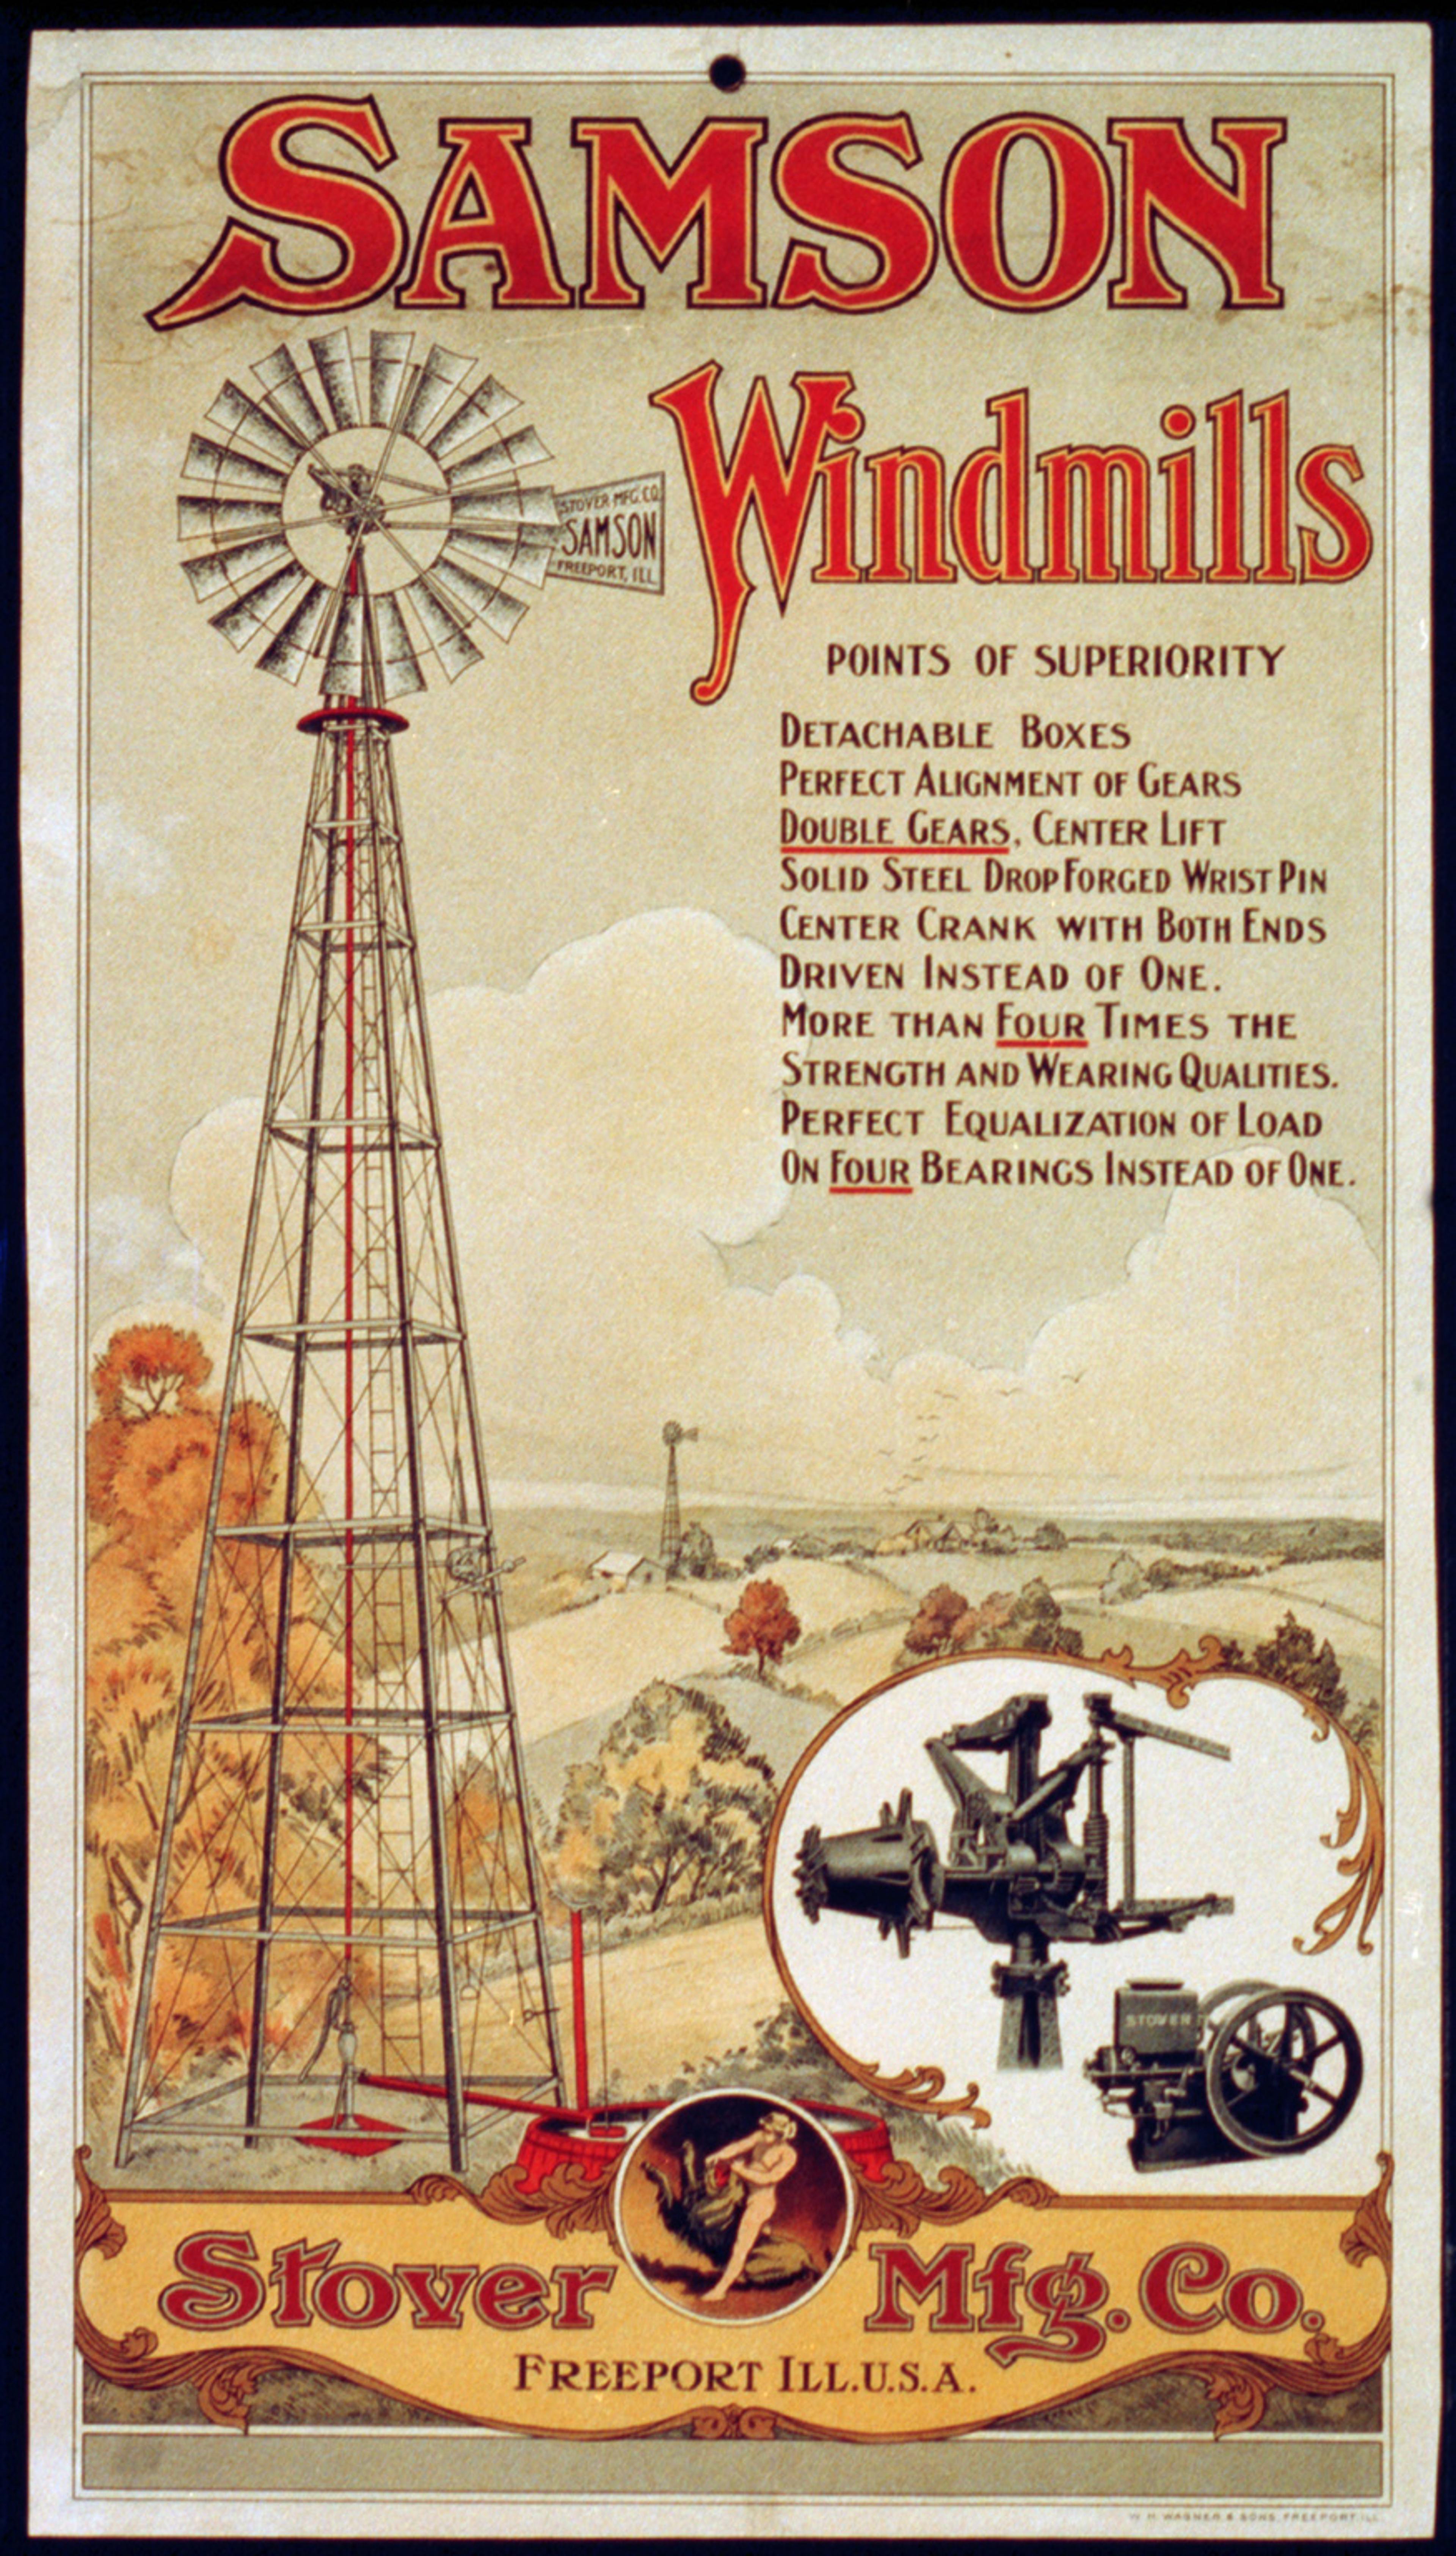 Vintage “Samson Windmills” advert by Stover Manufacturing Company, featuring a windmill illustration, product details, and rural landscape background.